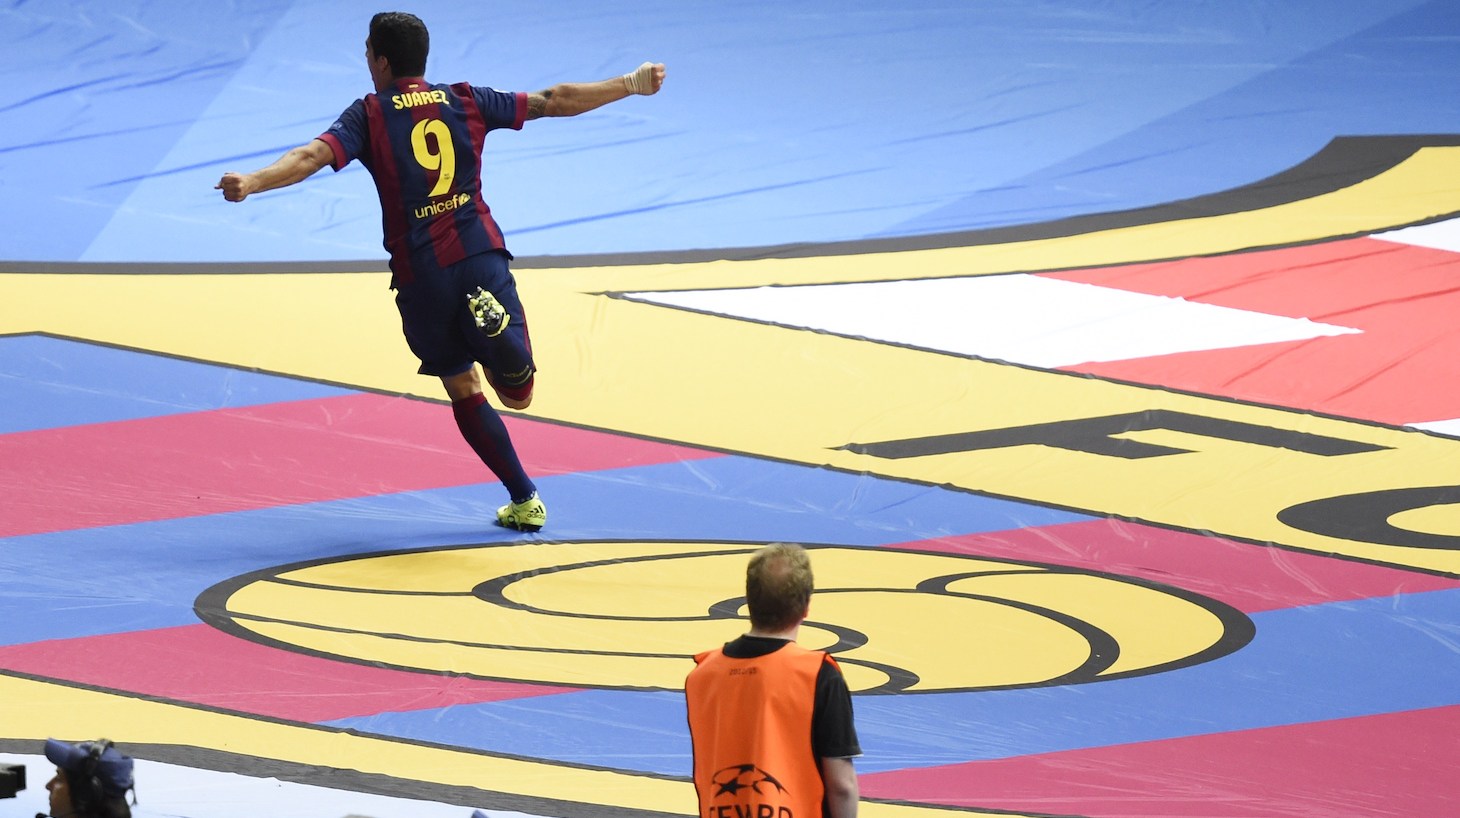 Barcelona's Uruguayan forward Luis Suarez (L) celebrates after scoring the 1-2 during the UEFA Champions League Final football match between Juventus and FC Barcelona at the Olympic Stadium in Berlin on June 6, 2015.